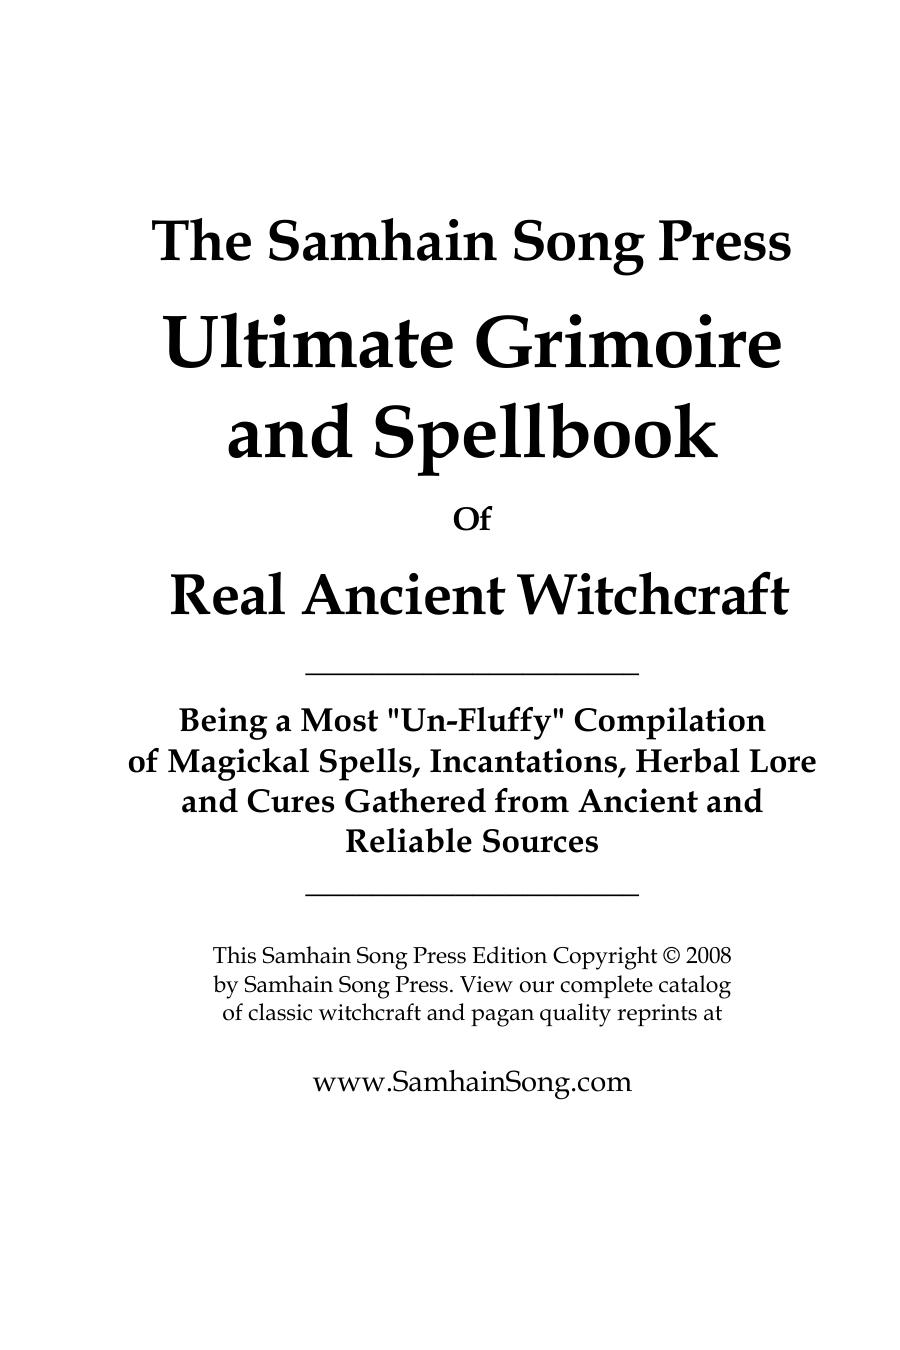 Ultimate Grimoire and Spellbook of Real Ancient Witchcraft